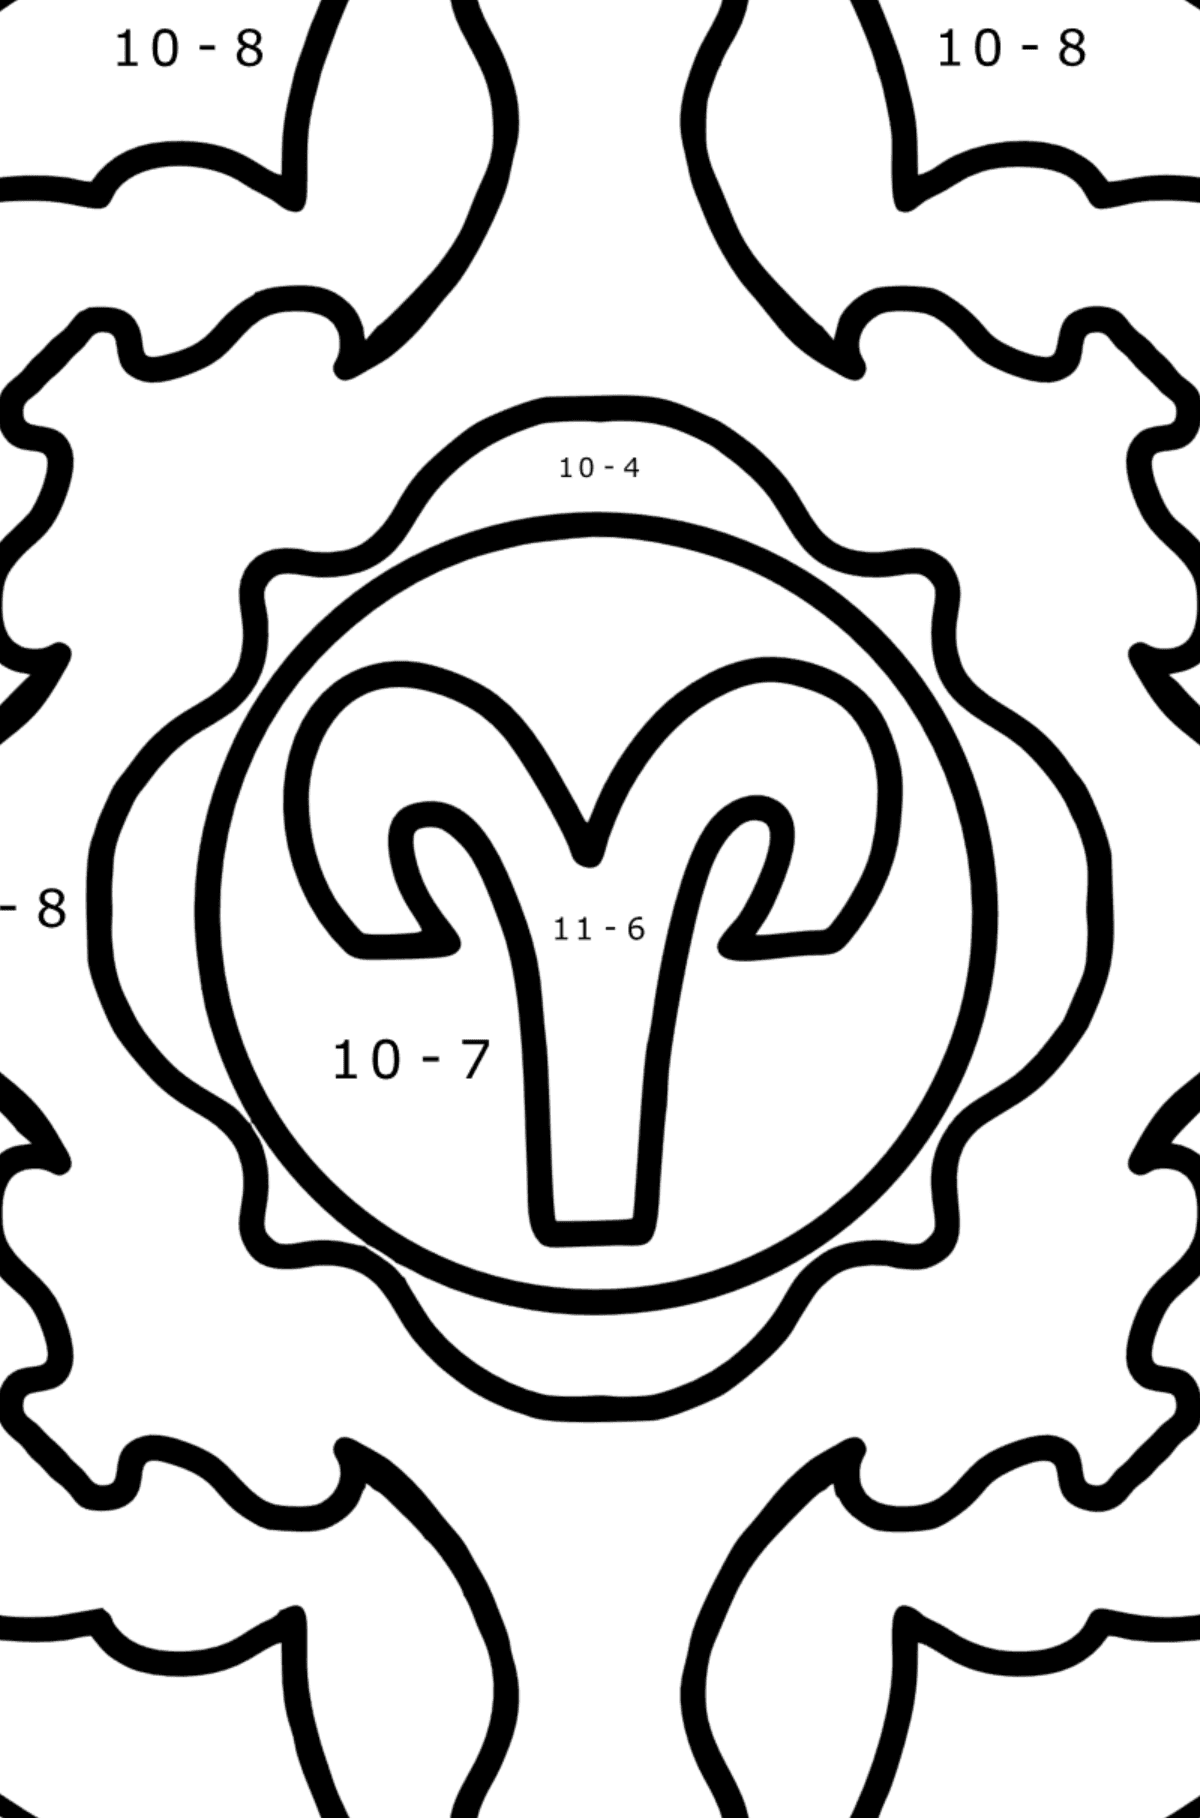 Coloring page - zodiac sign Aries - Math Coloring - Subtraction for Kids